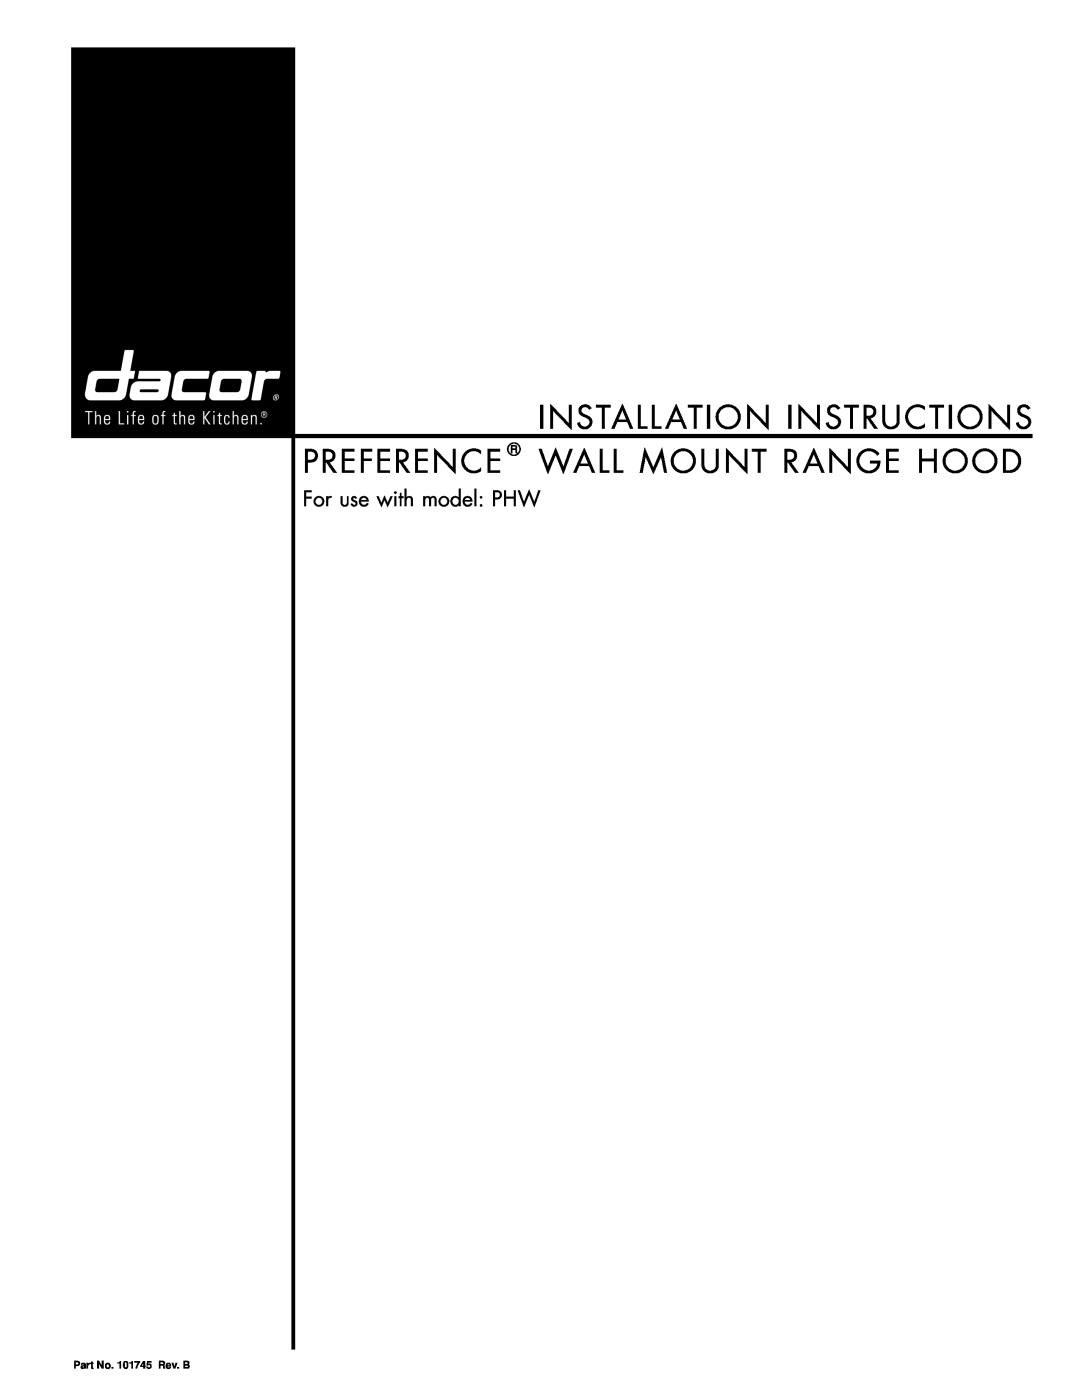 Dacor installation instructions Installation Instructions Preference Wall Mount Range Hood, For use with model PHW 